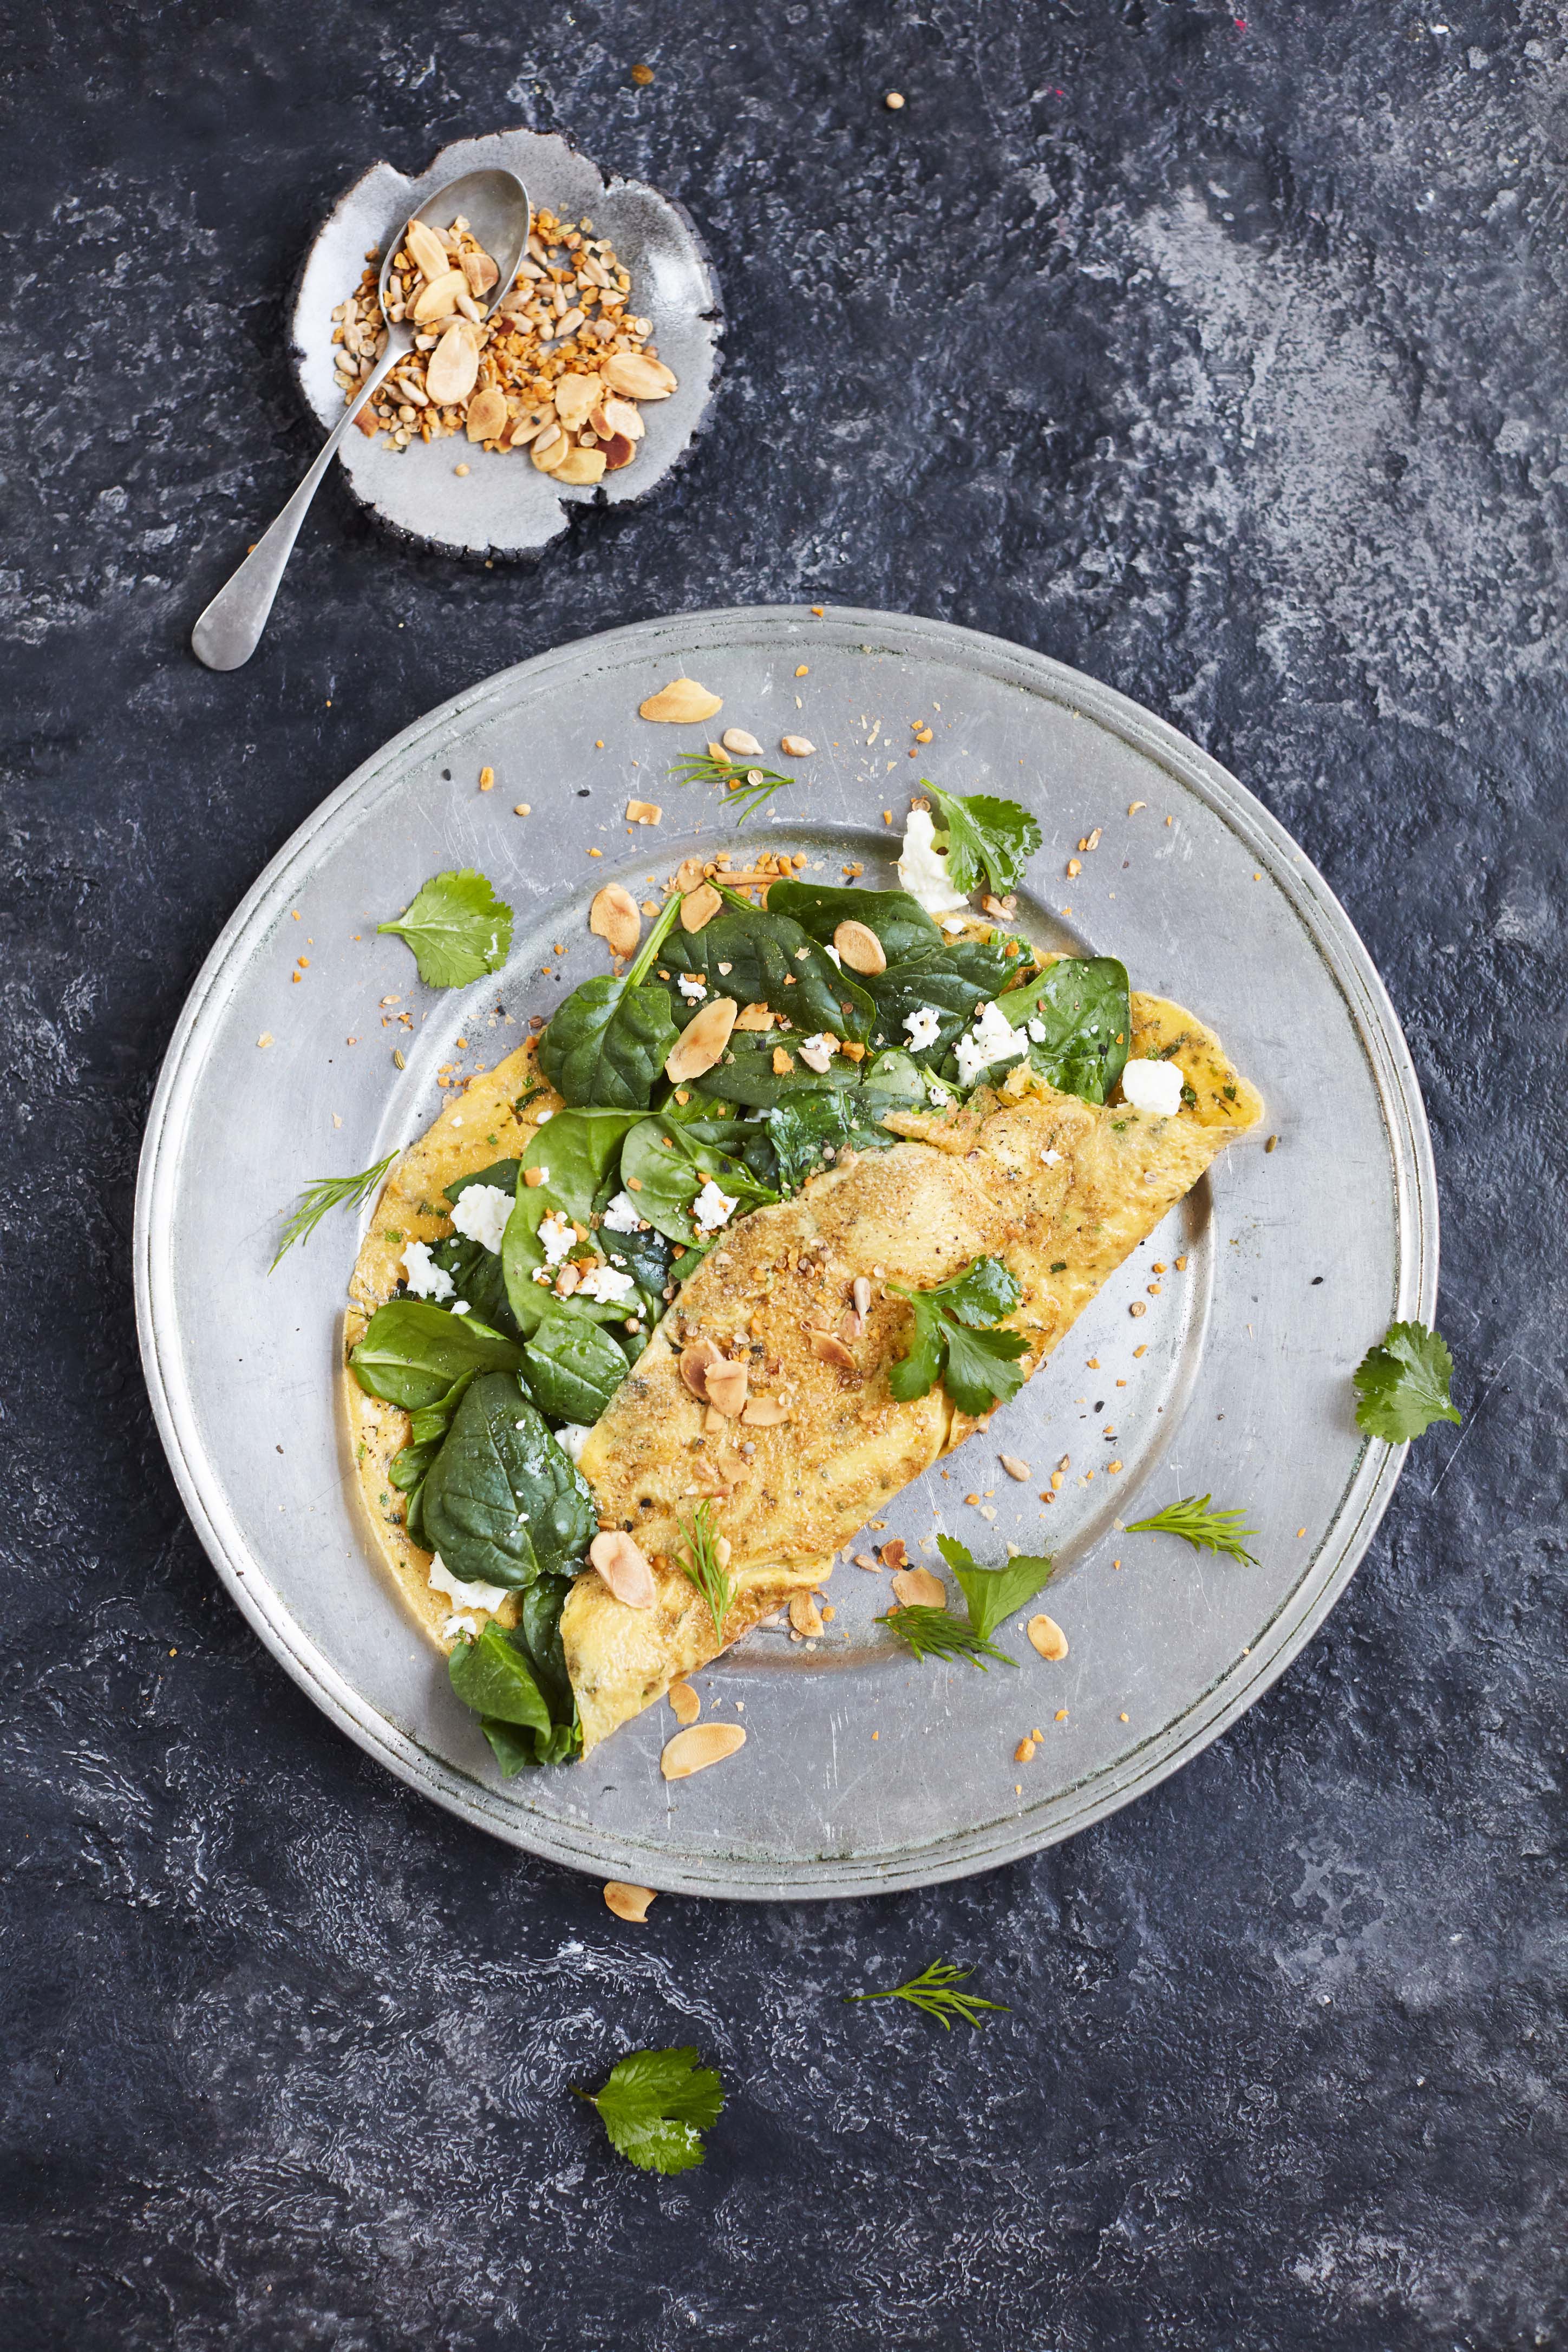 Mixed herb omelette with spinach, feta & dukkah